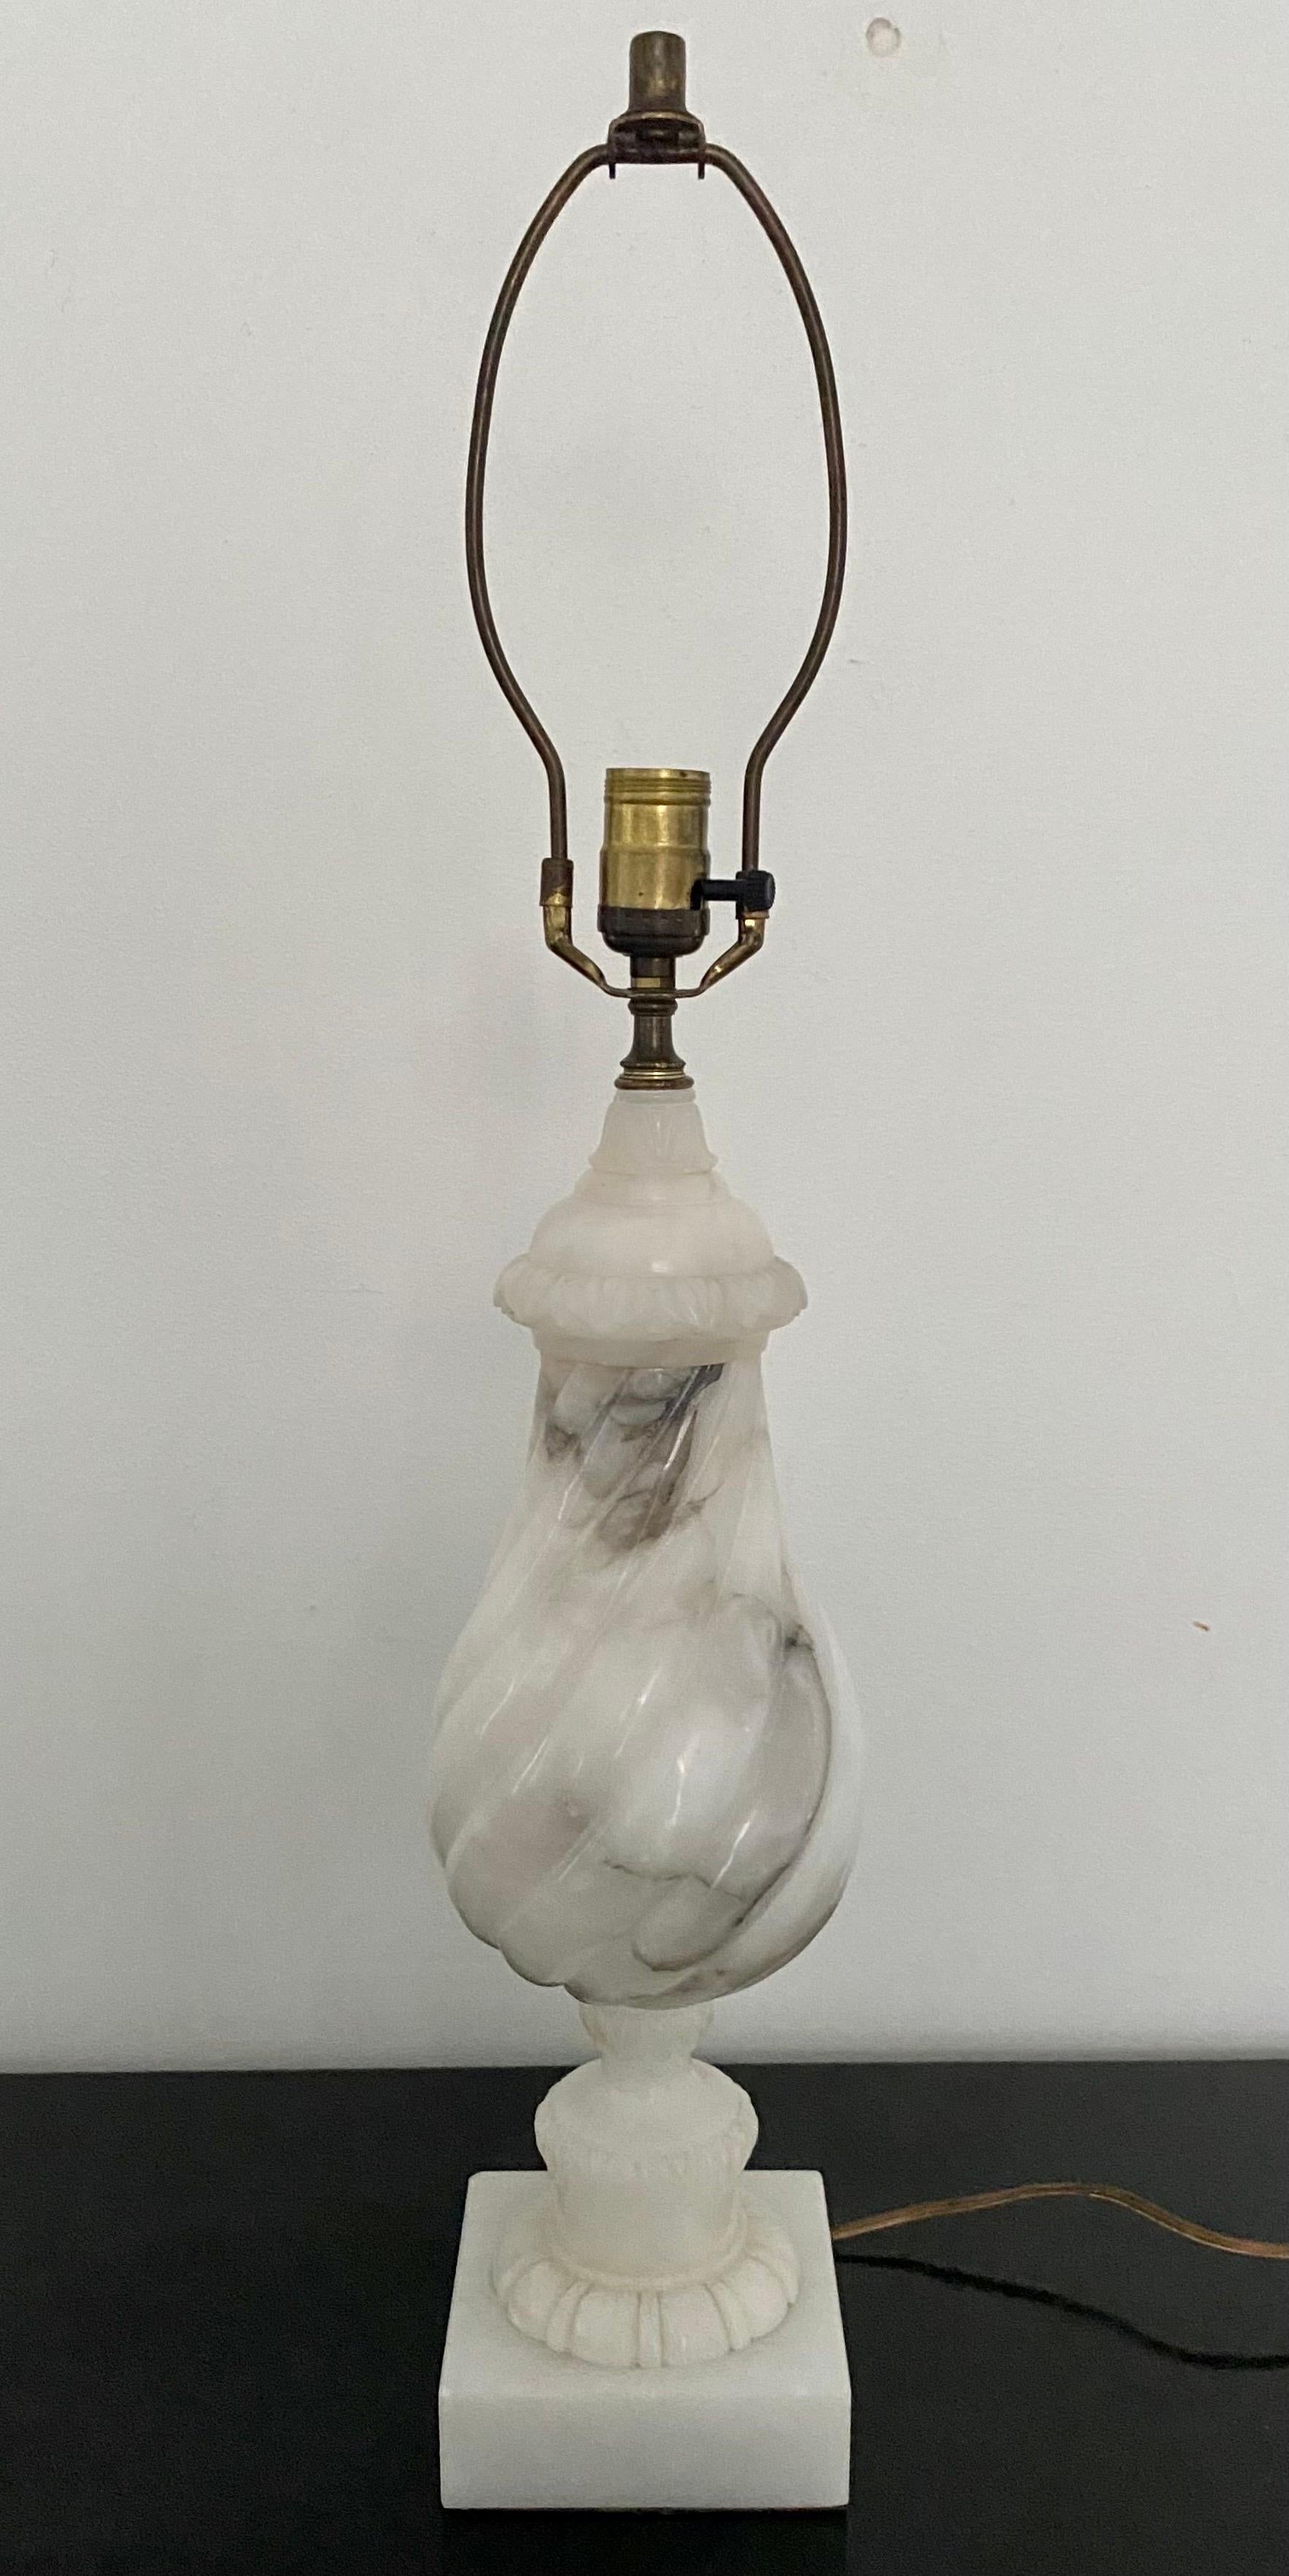 Sizable mid 20th century twisted balustrade marble table lamp mounted on a sqaure plinth base. This Neoclassical style urn form lamp features beautiful veiling and hand carved details. Lamp shade not included. 

Measures: 30 inches high to